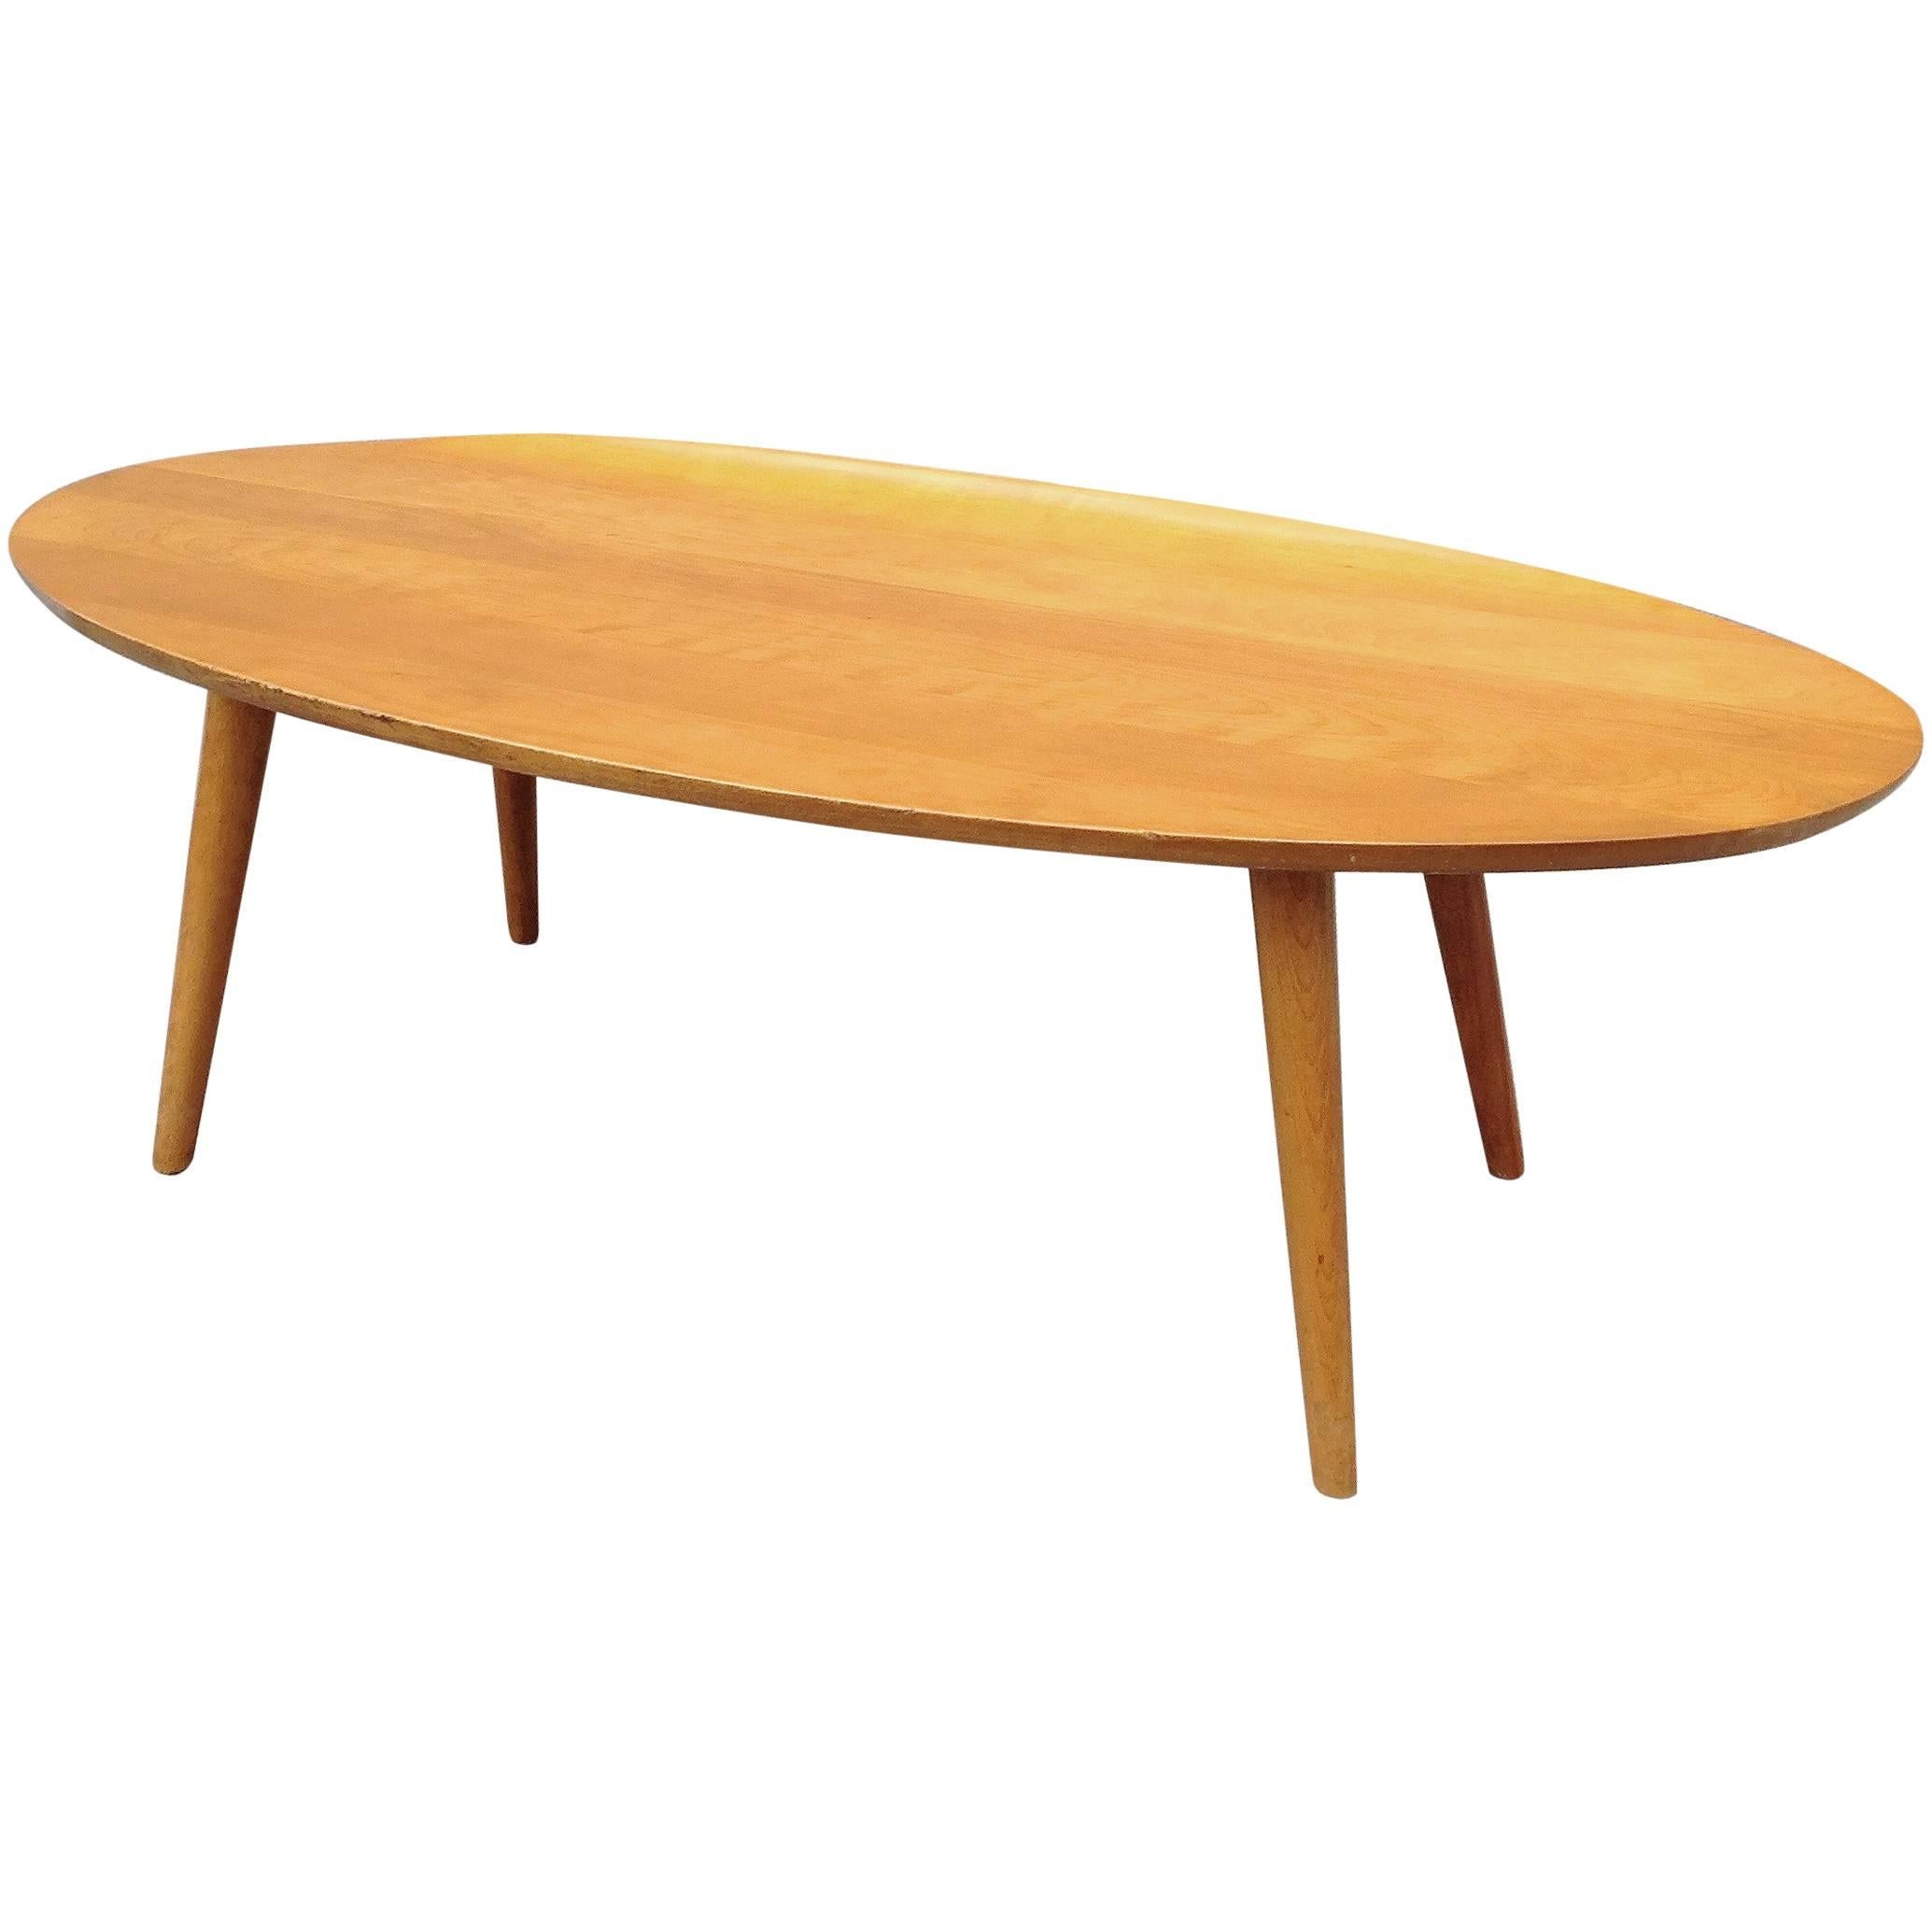 Russel Wright Elliptical Coffee Table with Curled Edge For Sale